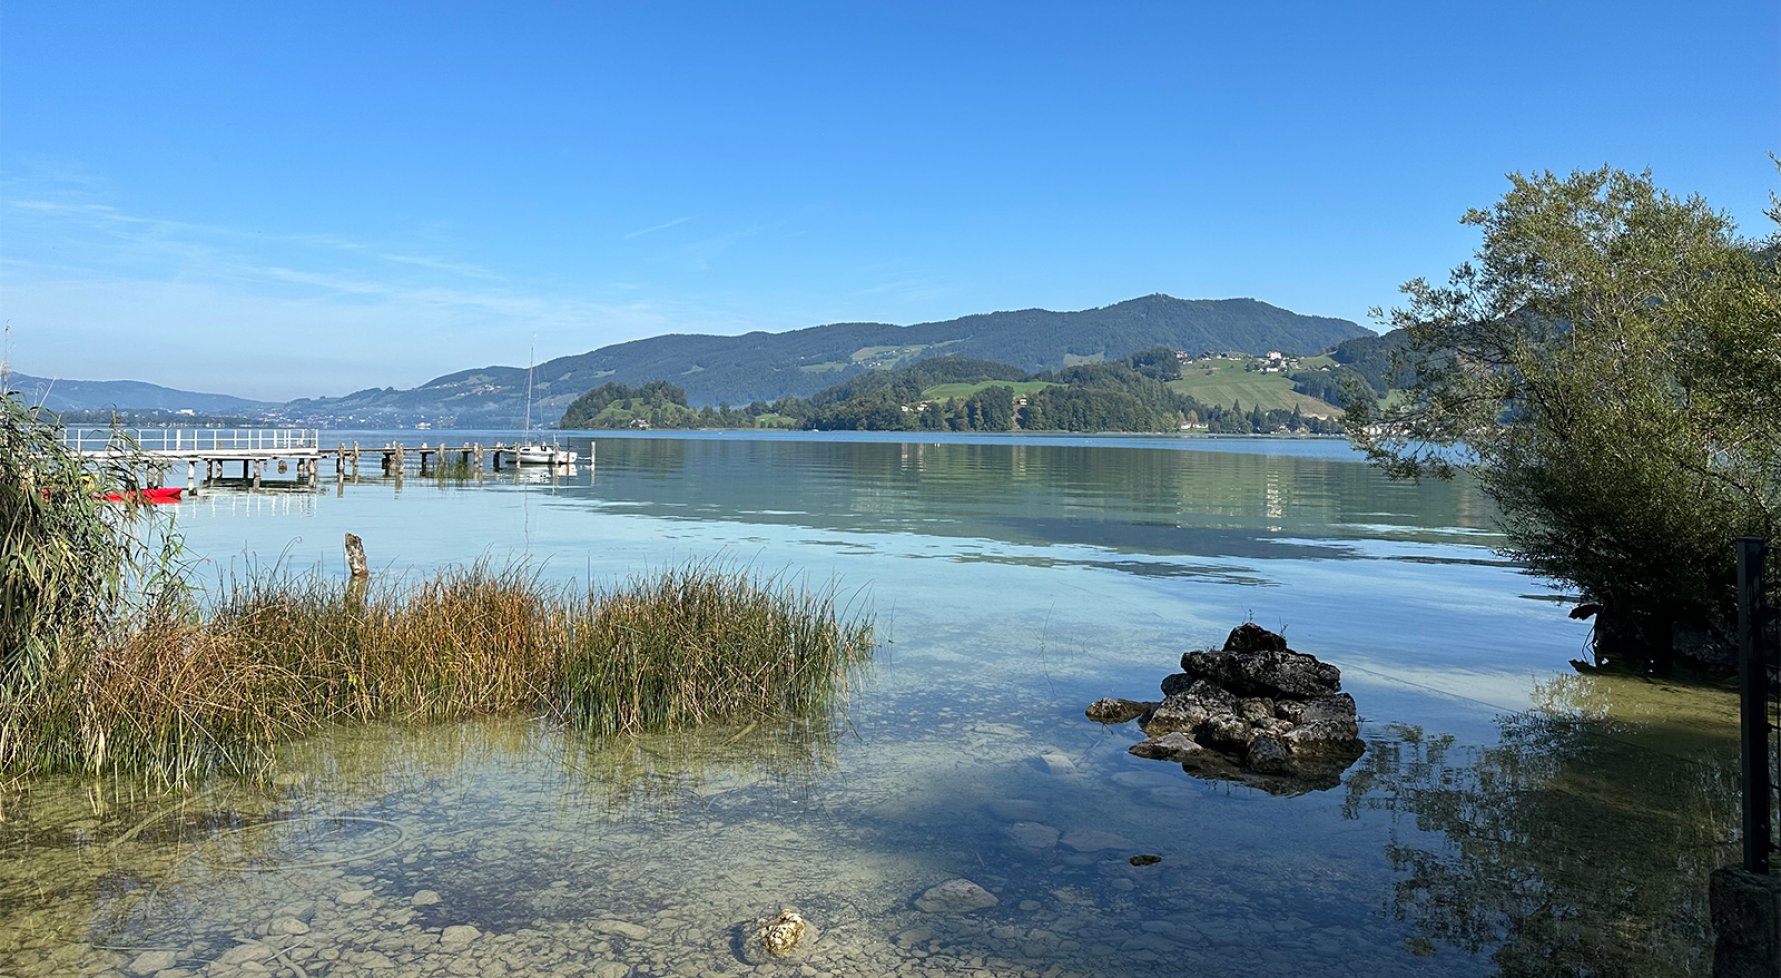 Property in 5310 Mondsee - St. Lorenz: Salzkammergut villa with its own 350 m² swimming area on the beautiful Mondseelake - picture 1